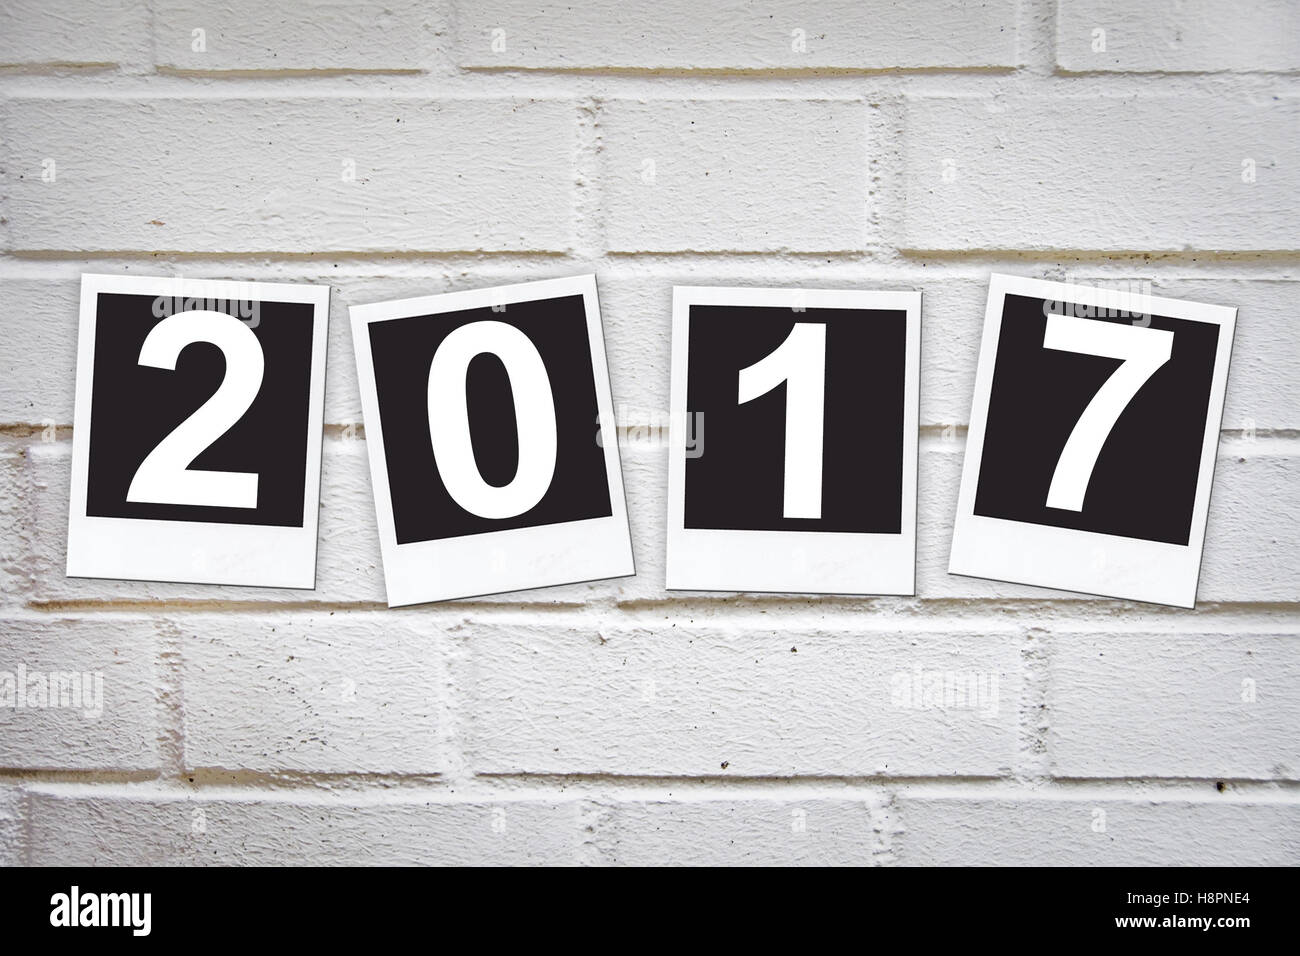 2017 in instant photo frames on a brick wall Stock Photo